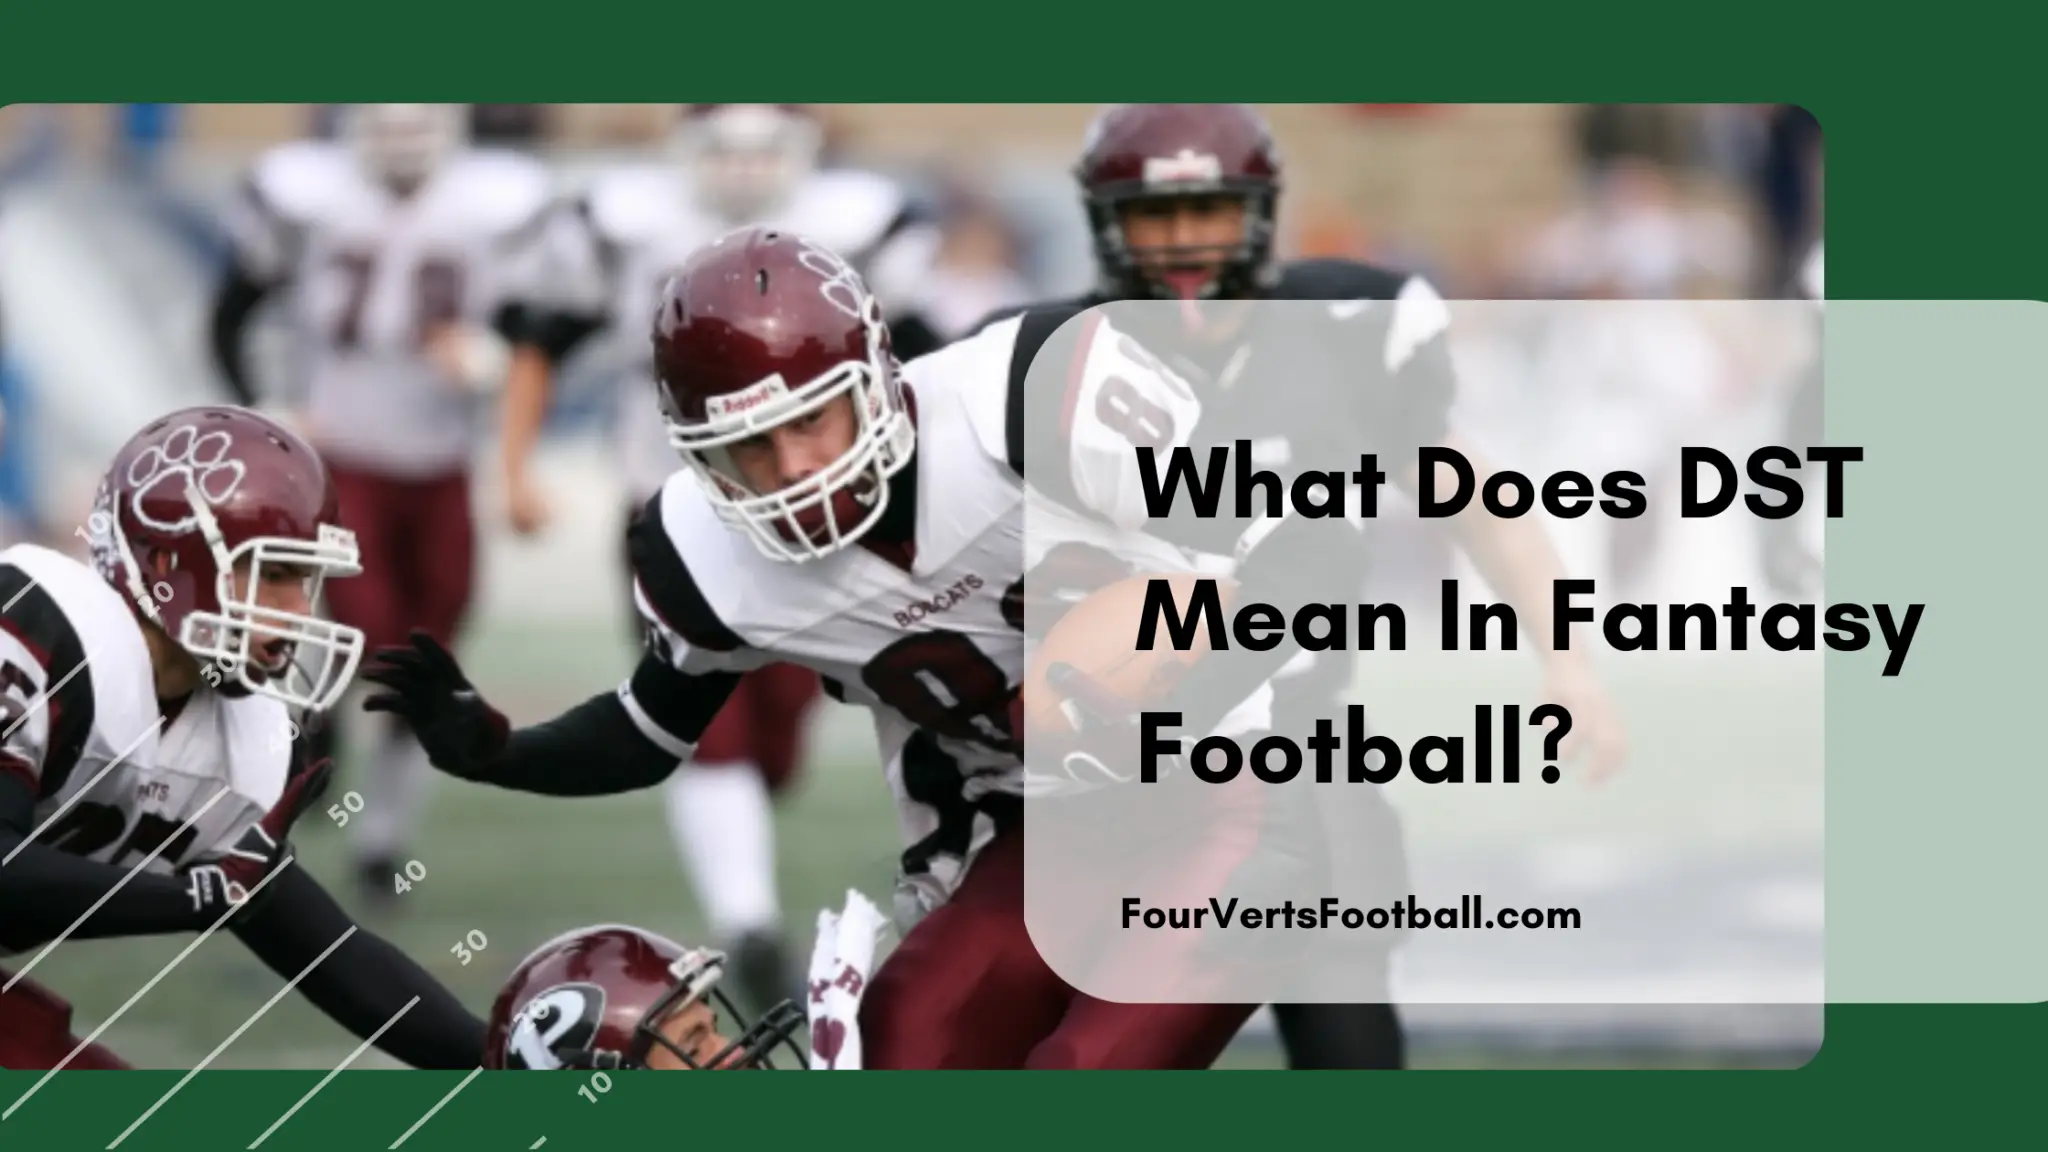 What Is DST In Fantasy Football? Four Verts Football